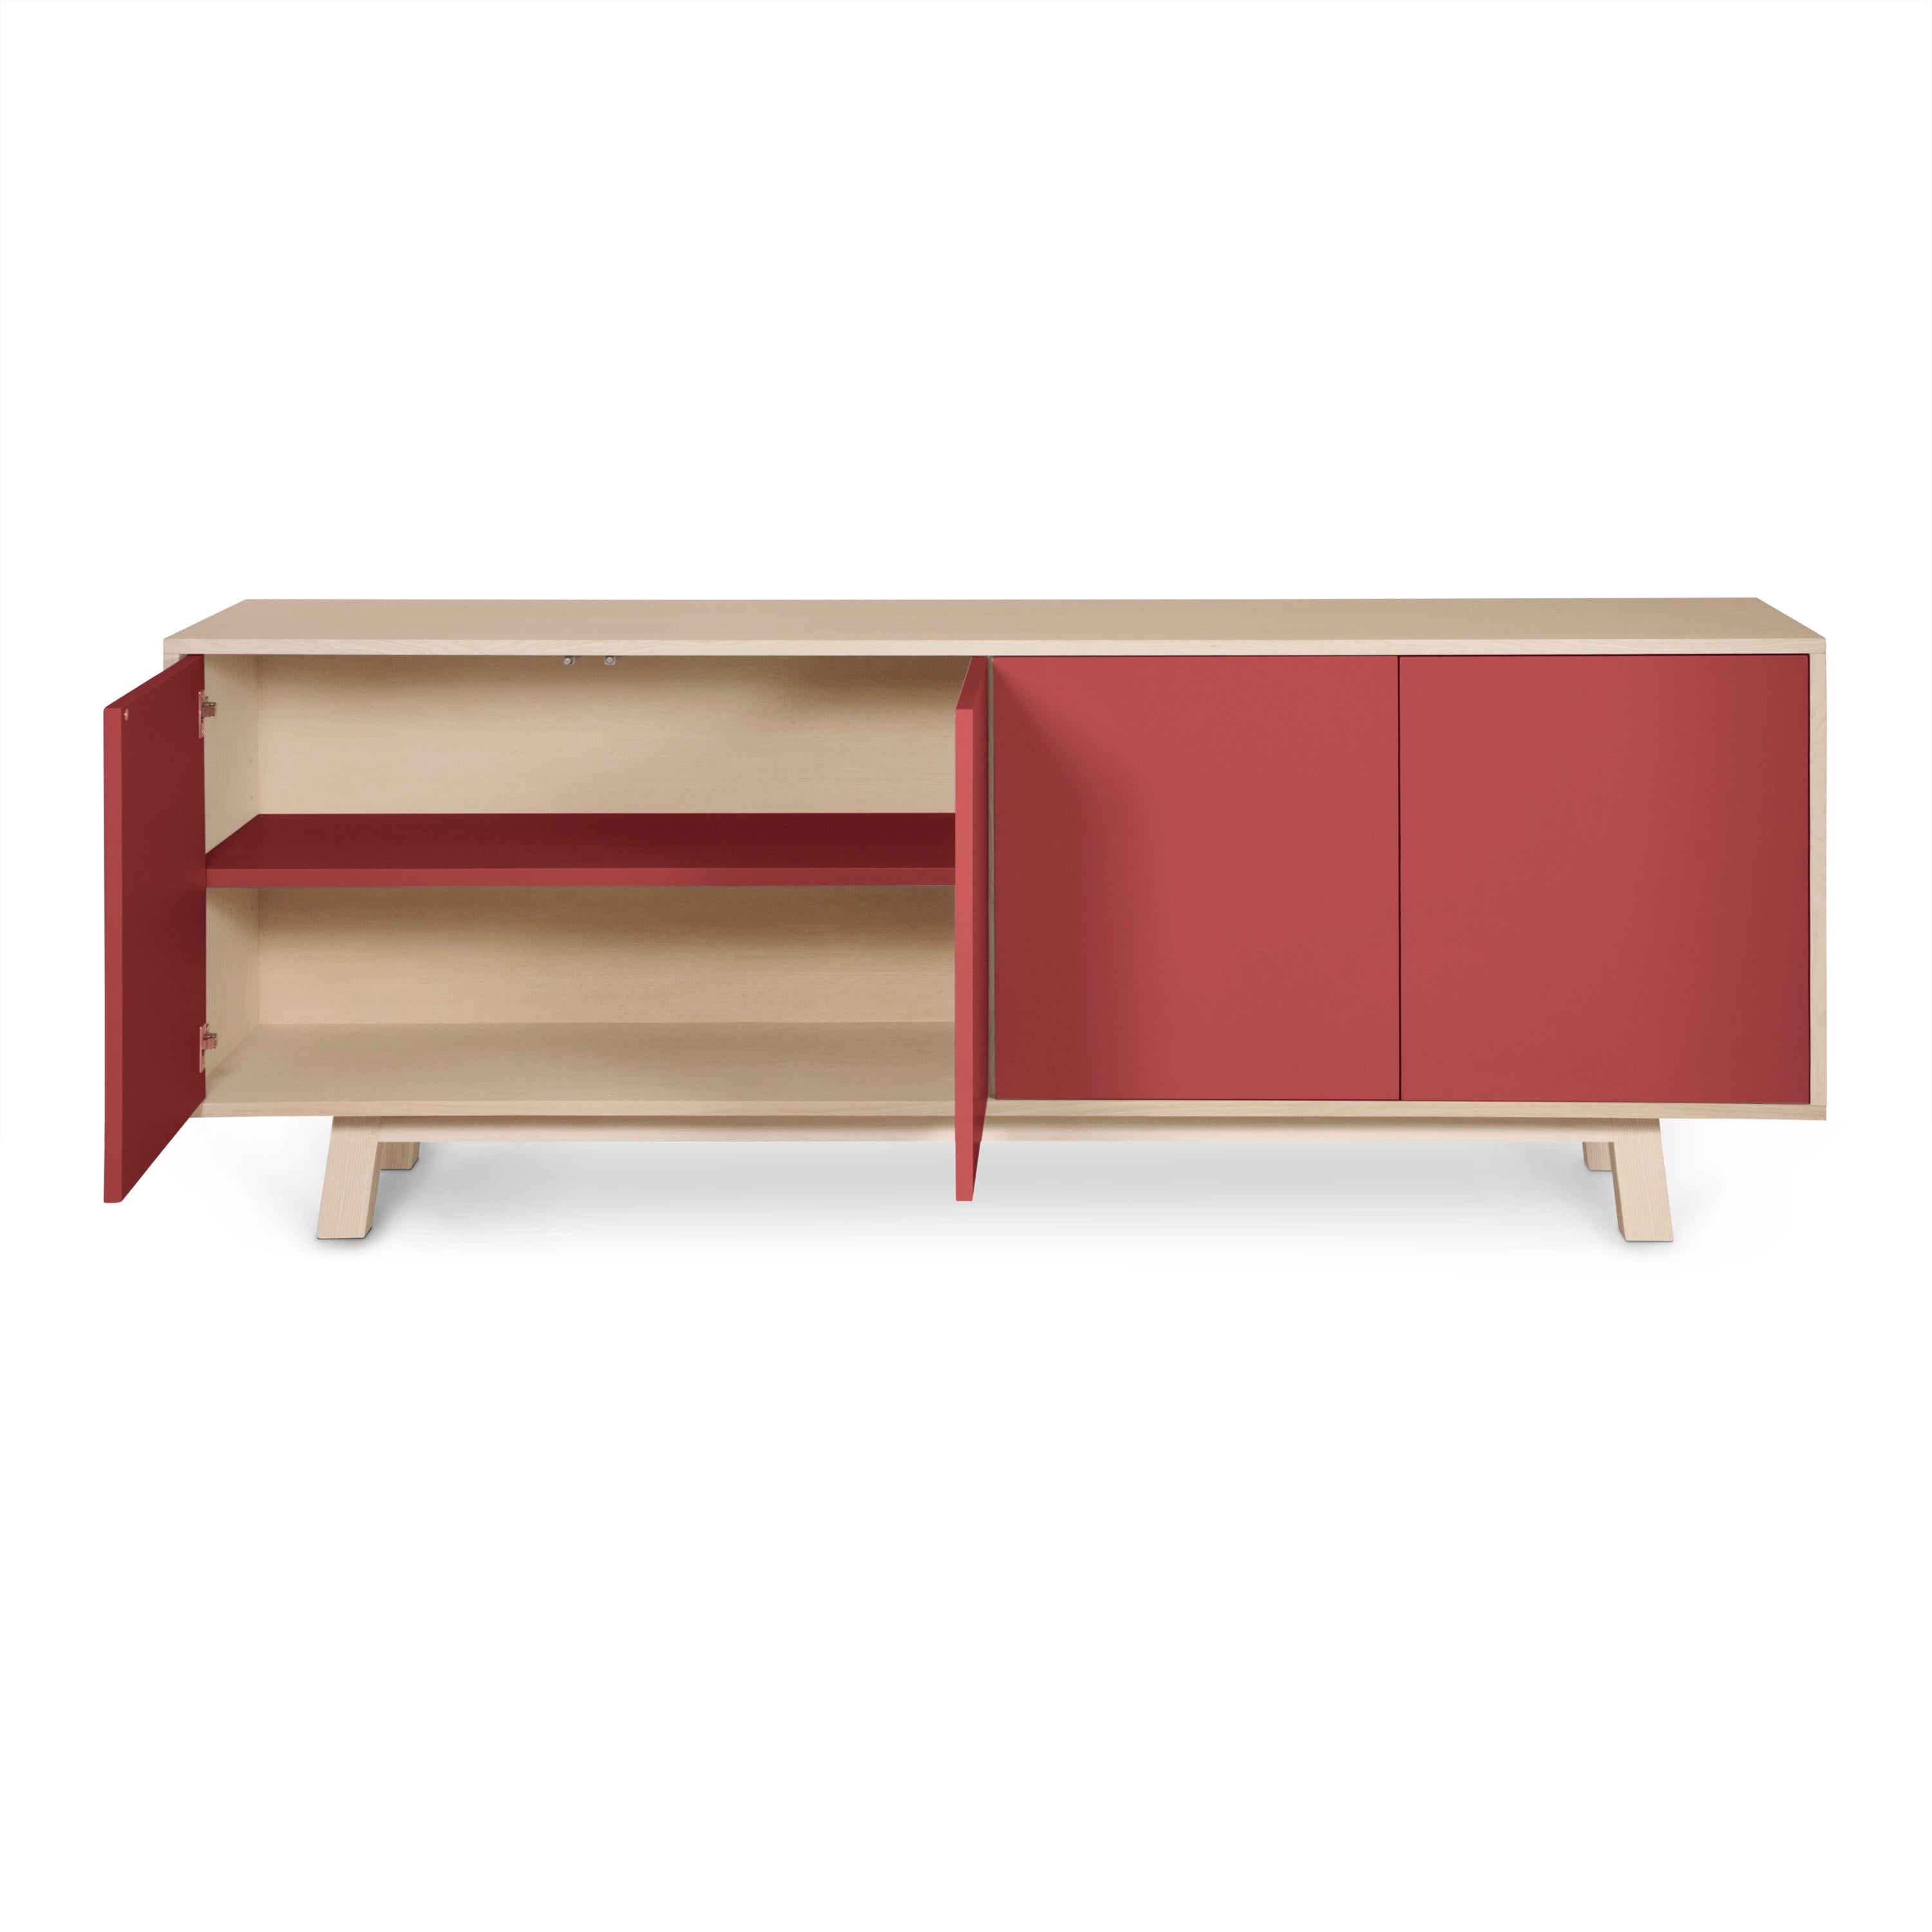 Contemporary Red 4-Door Low Sideboard in PEFC-Certified Ash Wood, Design Eric Gizard, Paris For Sale